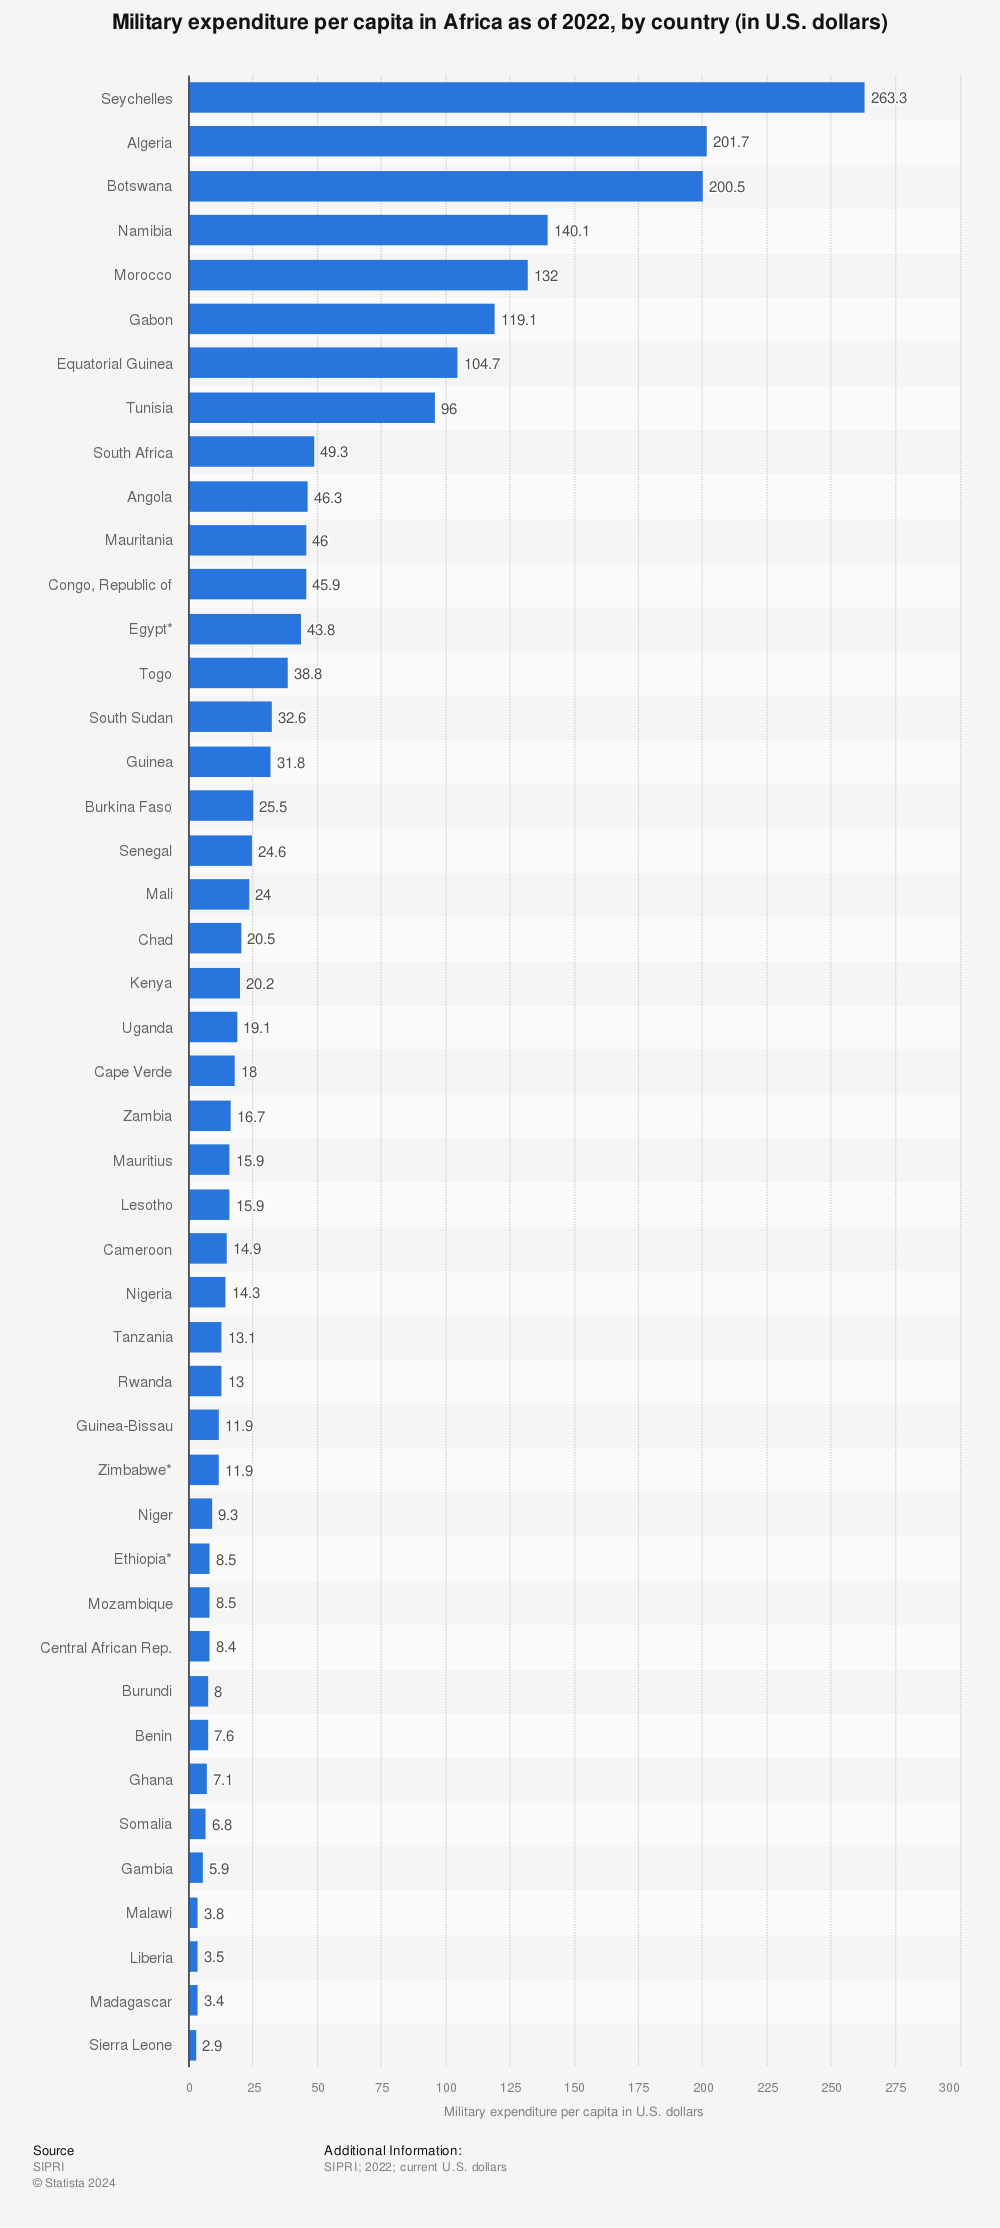 Statistic: Military expenditure per capita in Africa as of 2022, by country (in U.S. dollars) | Statista